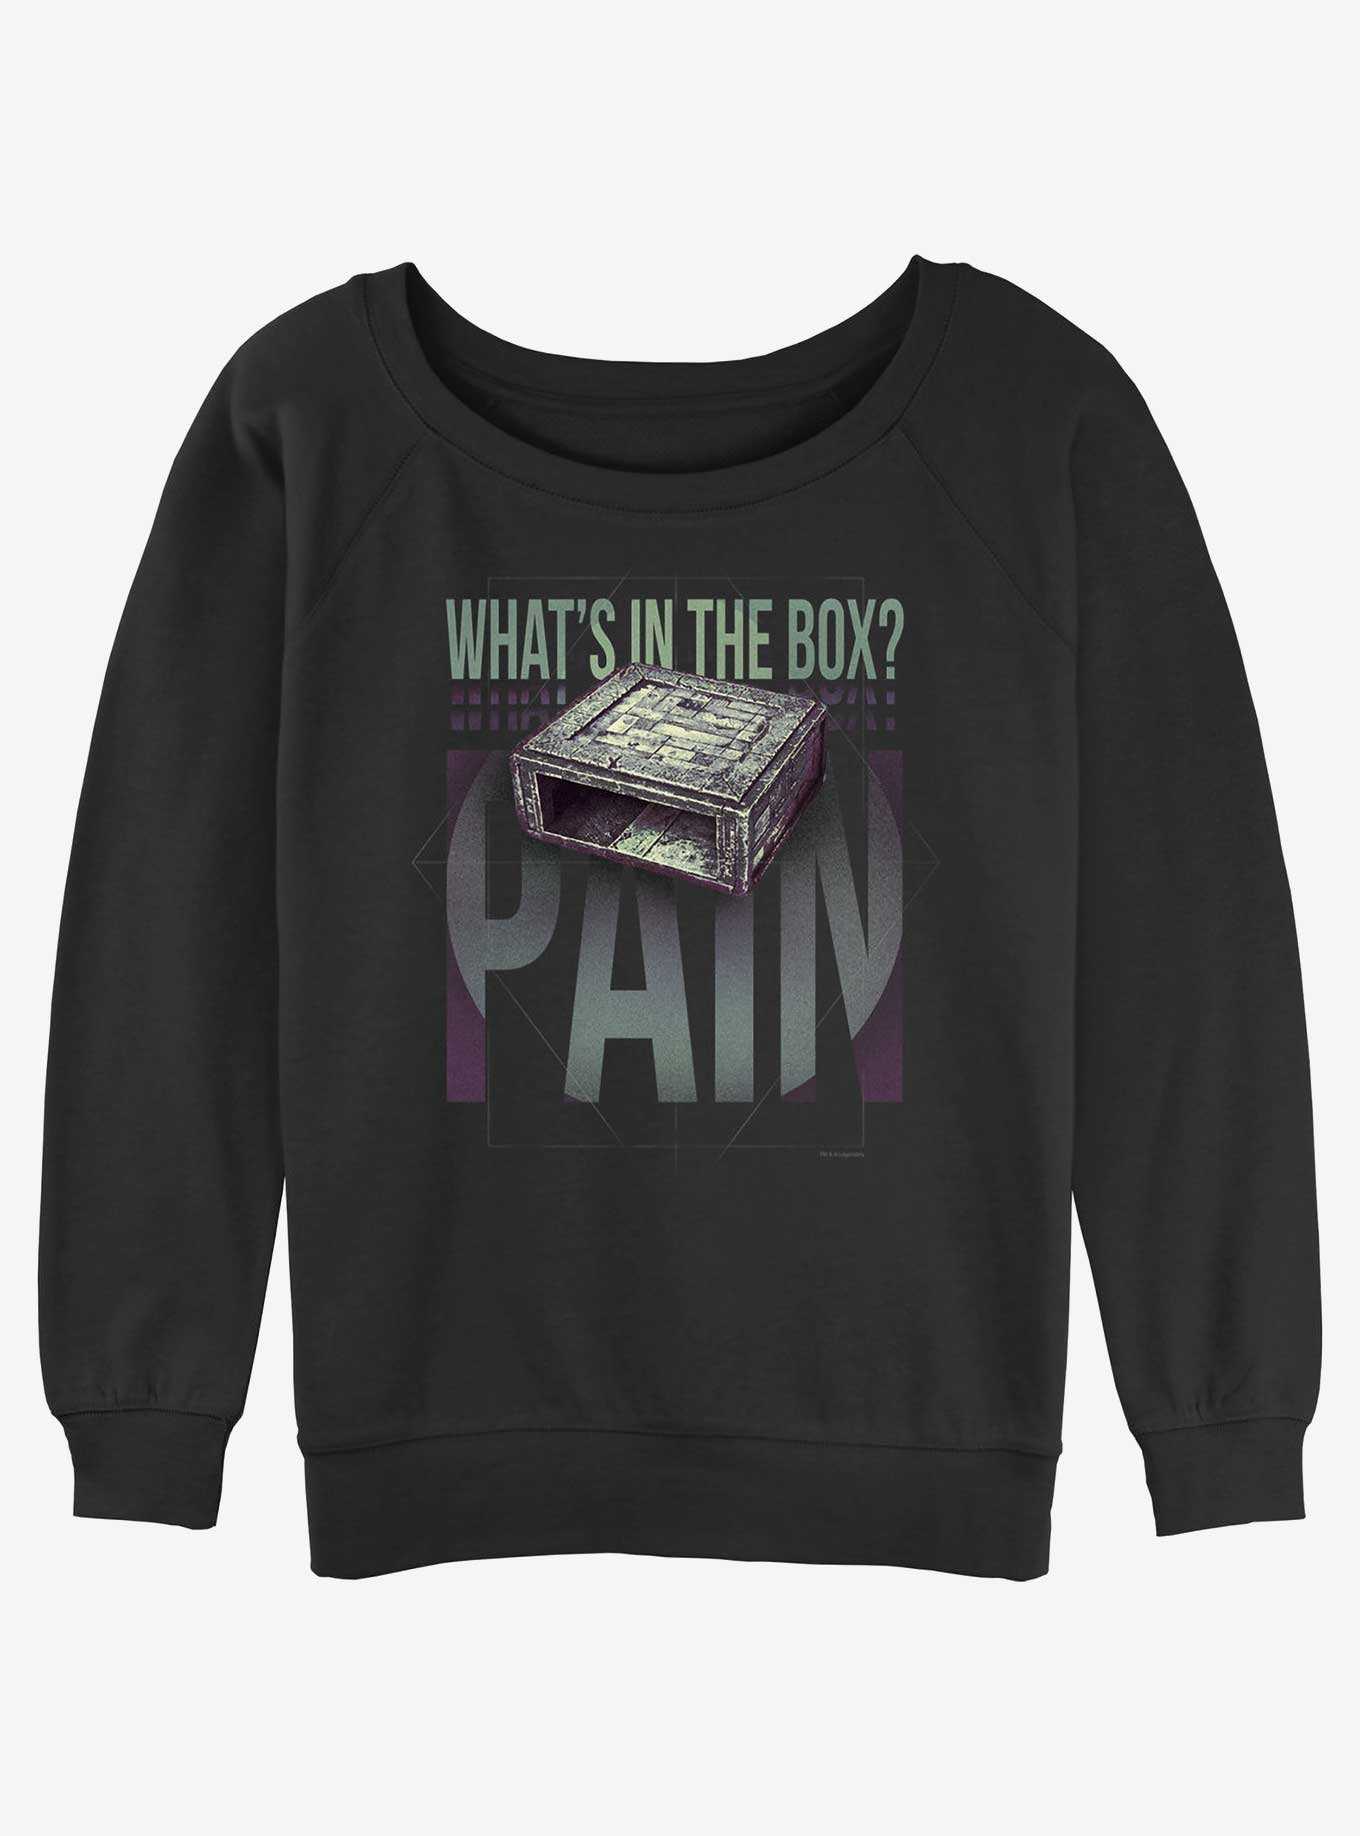 Dune: Part Two What's In The Box Pain Girls Slouchy Sweatshirt, , hi-res